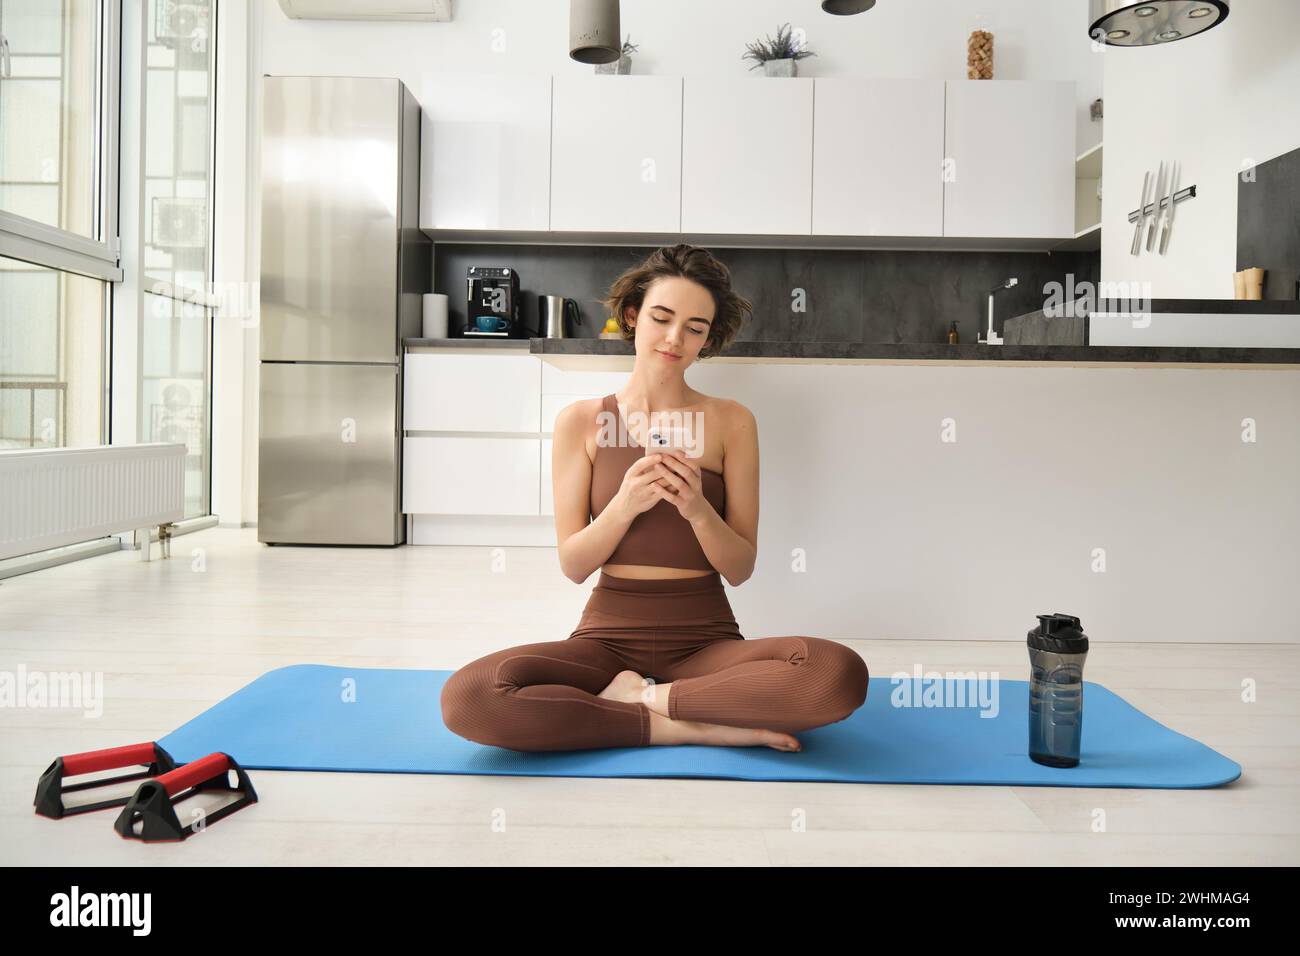 Image of young sport woman sitting at home on yoga mat, doing workout,  stretching fitness exercises on floor in living room, smiling and looking  happy at camera 35338806 Stock Photo at Vecteezy